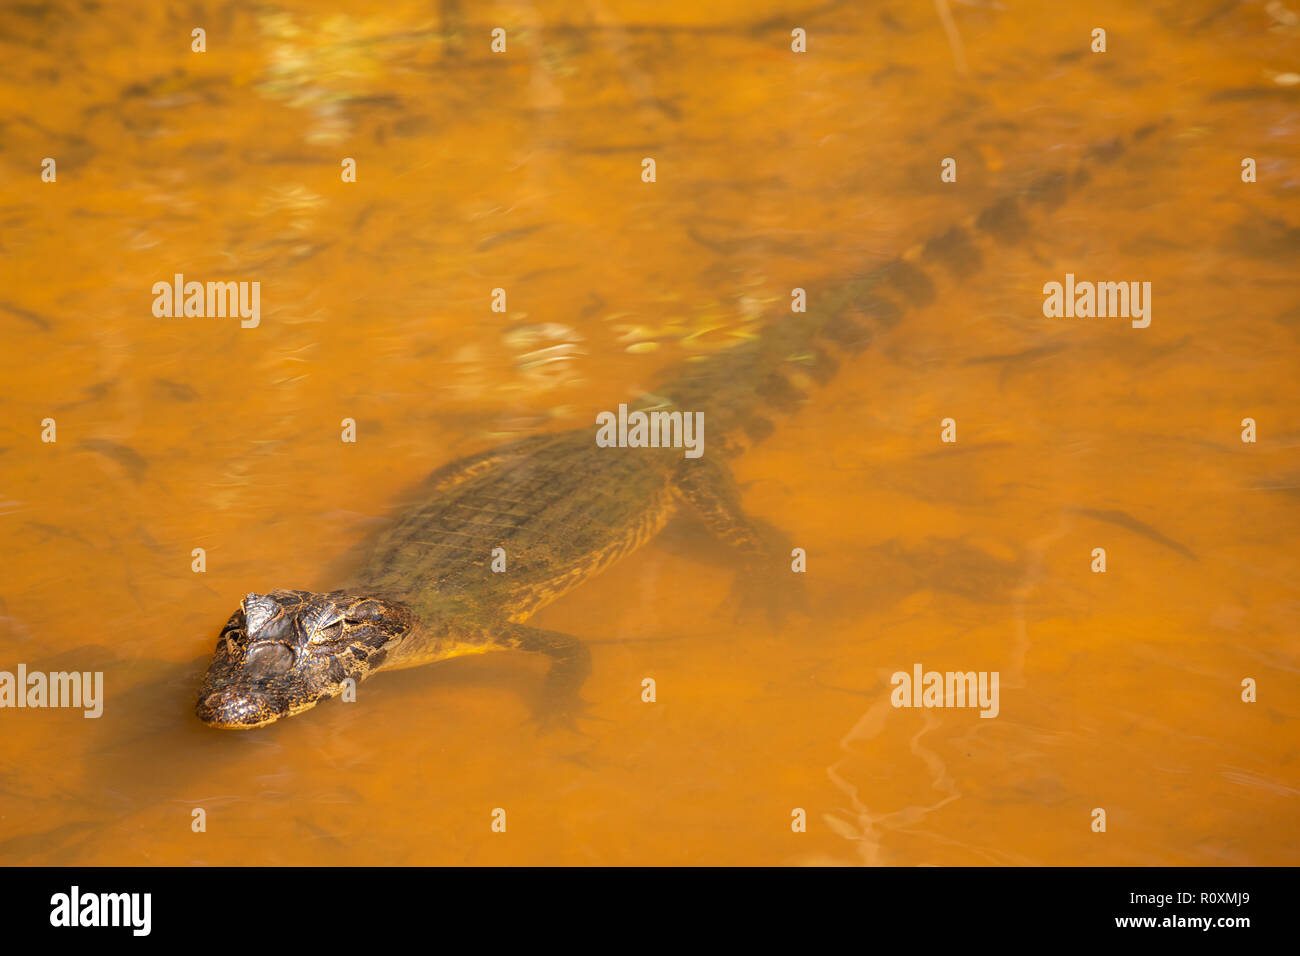 young caiman yacare sitting in shallow water Stock Photo